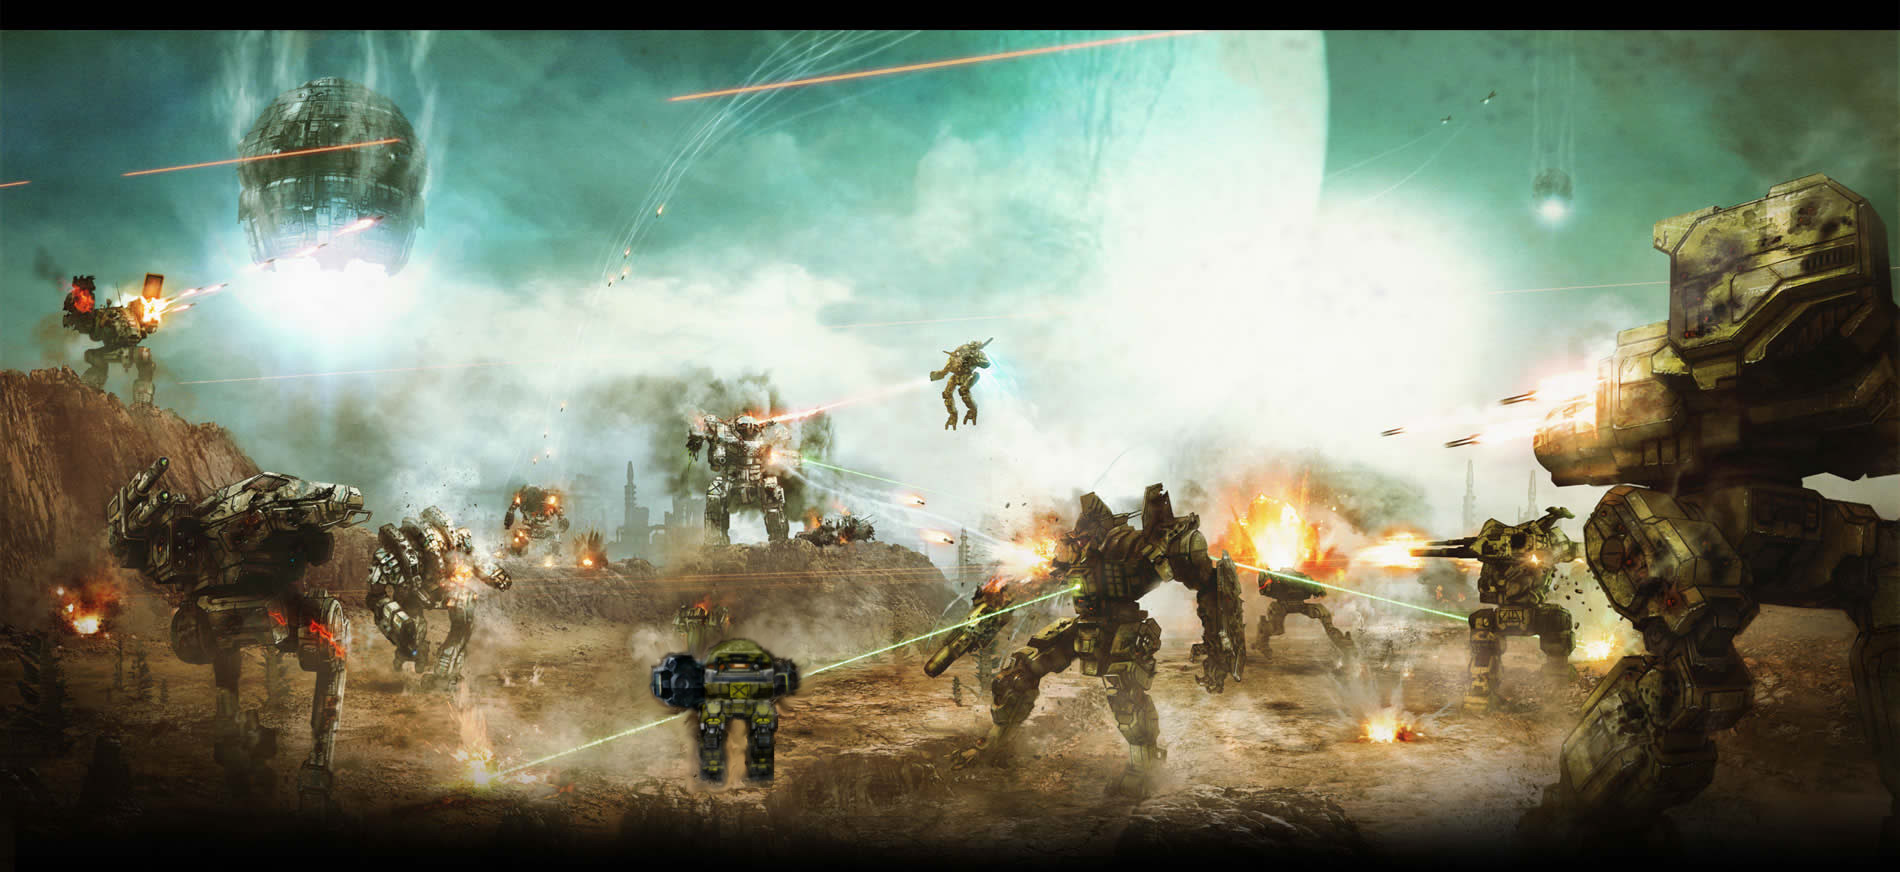 Mwo Forums New Background Is Awsome Whats That Mech